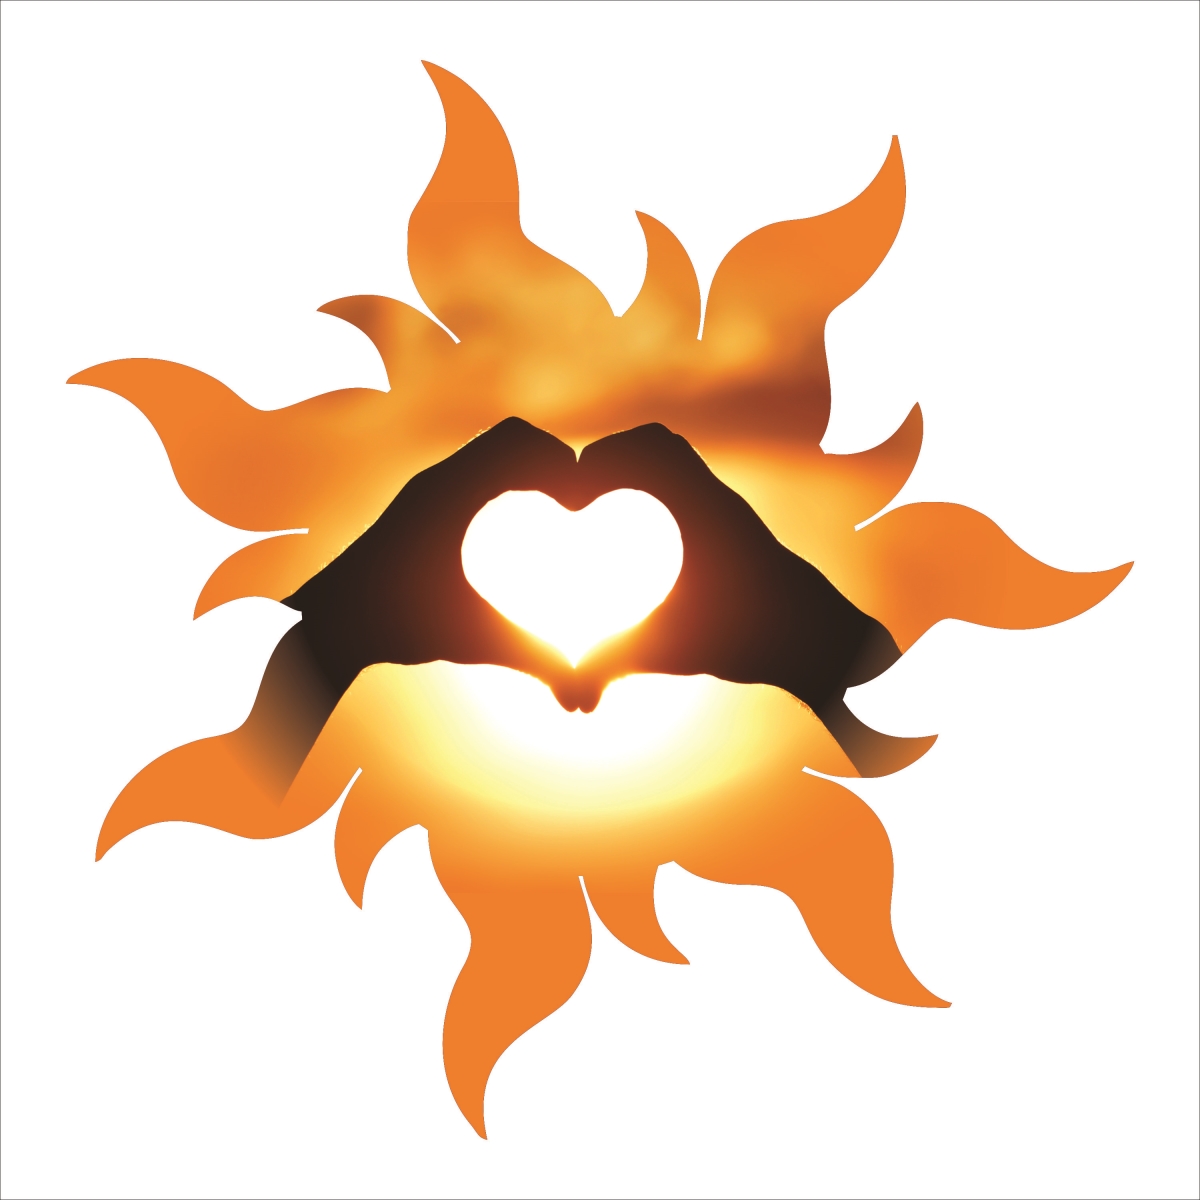 Sunsilhouette-18heart 18 In. Leisure Radiant Sun Silhouette Metal Laser Cut Wall Art With Vivid Image Of A Hand Heart In The Sun